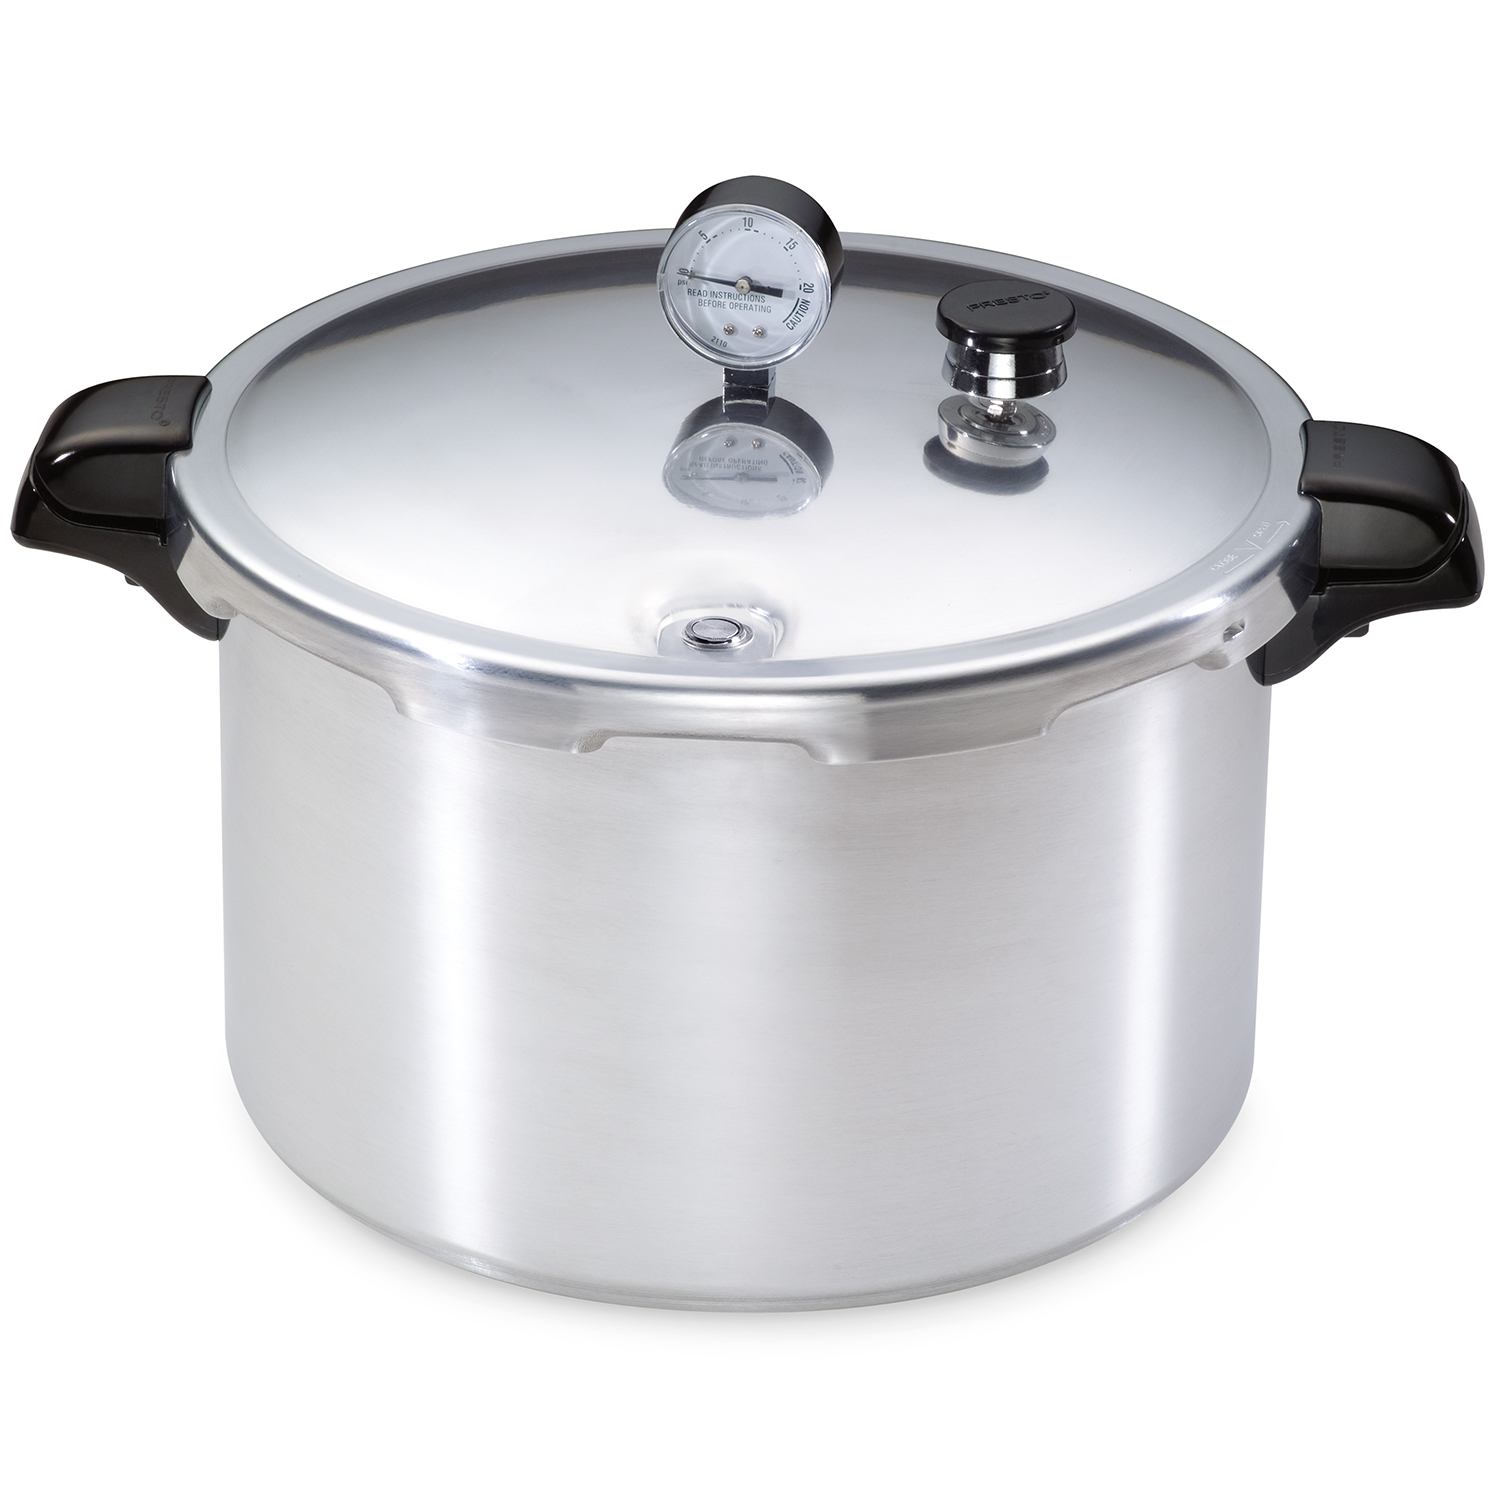 Photos - Other Accessories Presto Brushed Aluminum Pressure Cooker and Canner 16 qt 01755 